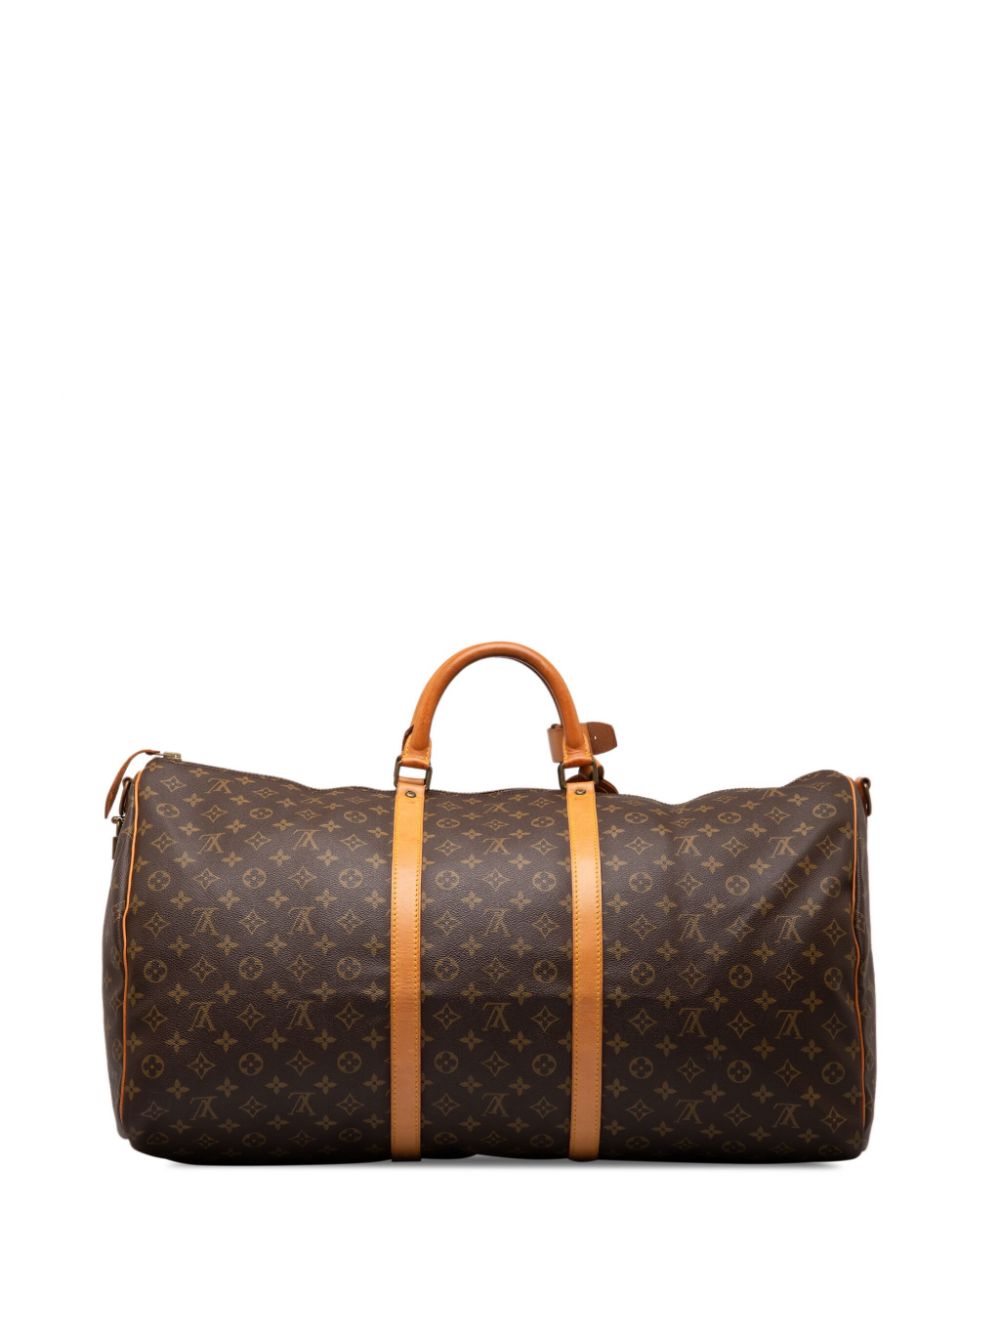 Louis Vuitton Pre-Owned 1984 Monogram Keepall Bandouliere 60 travel bag - Bruin